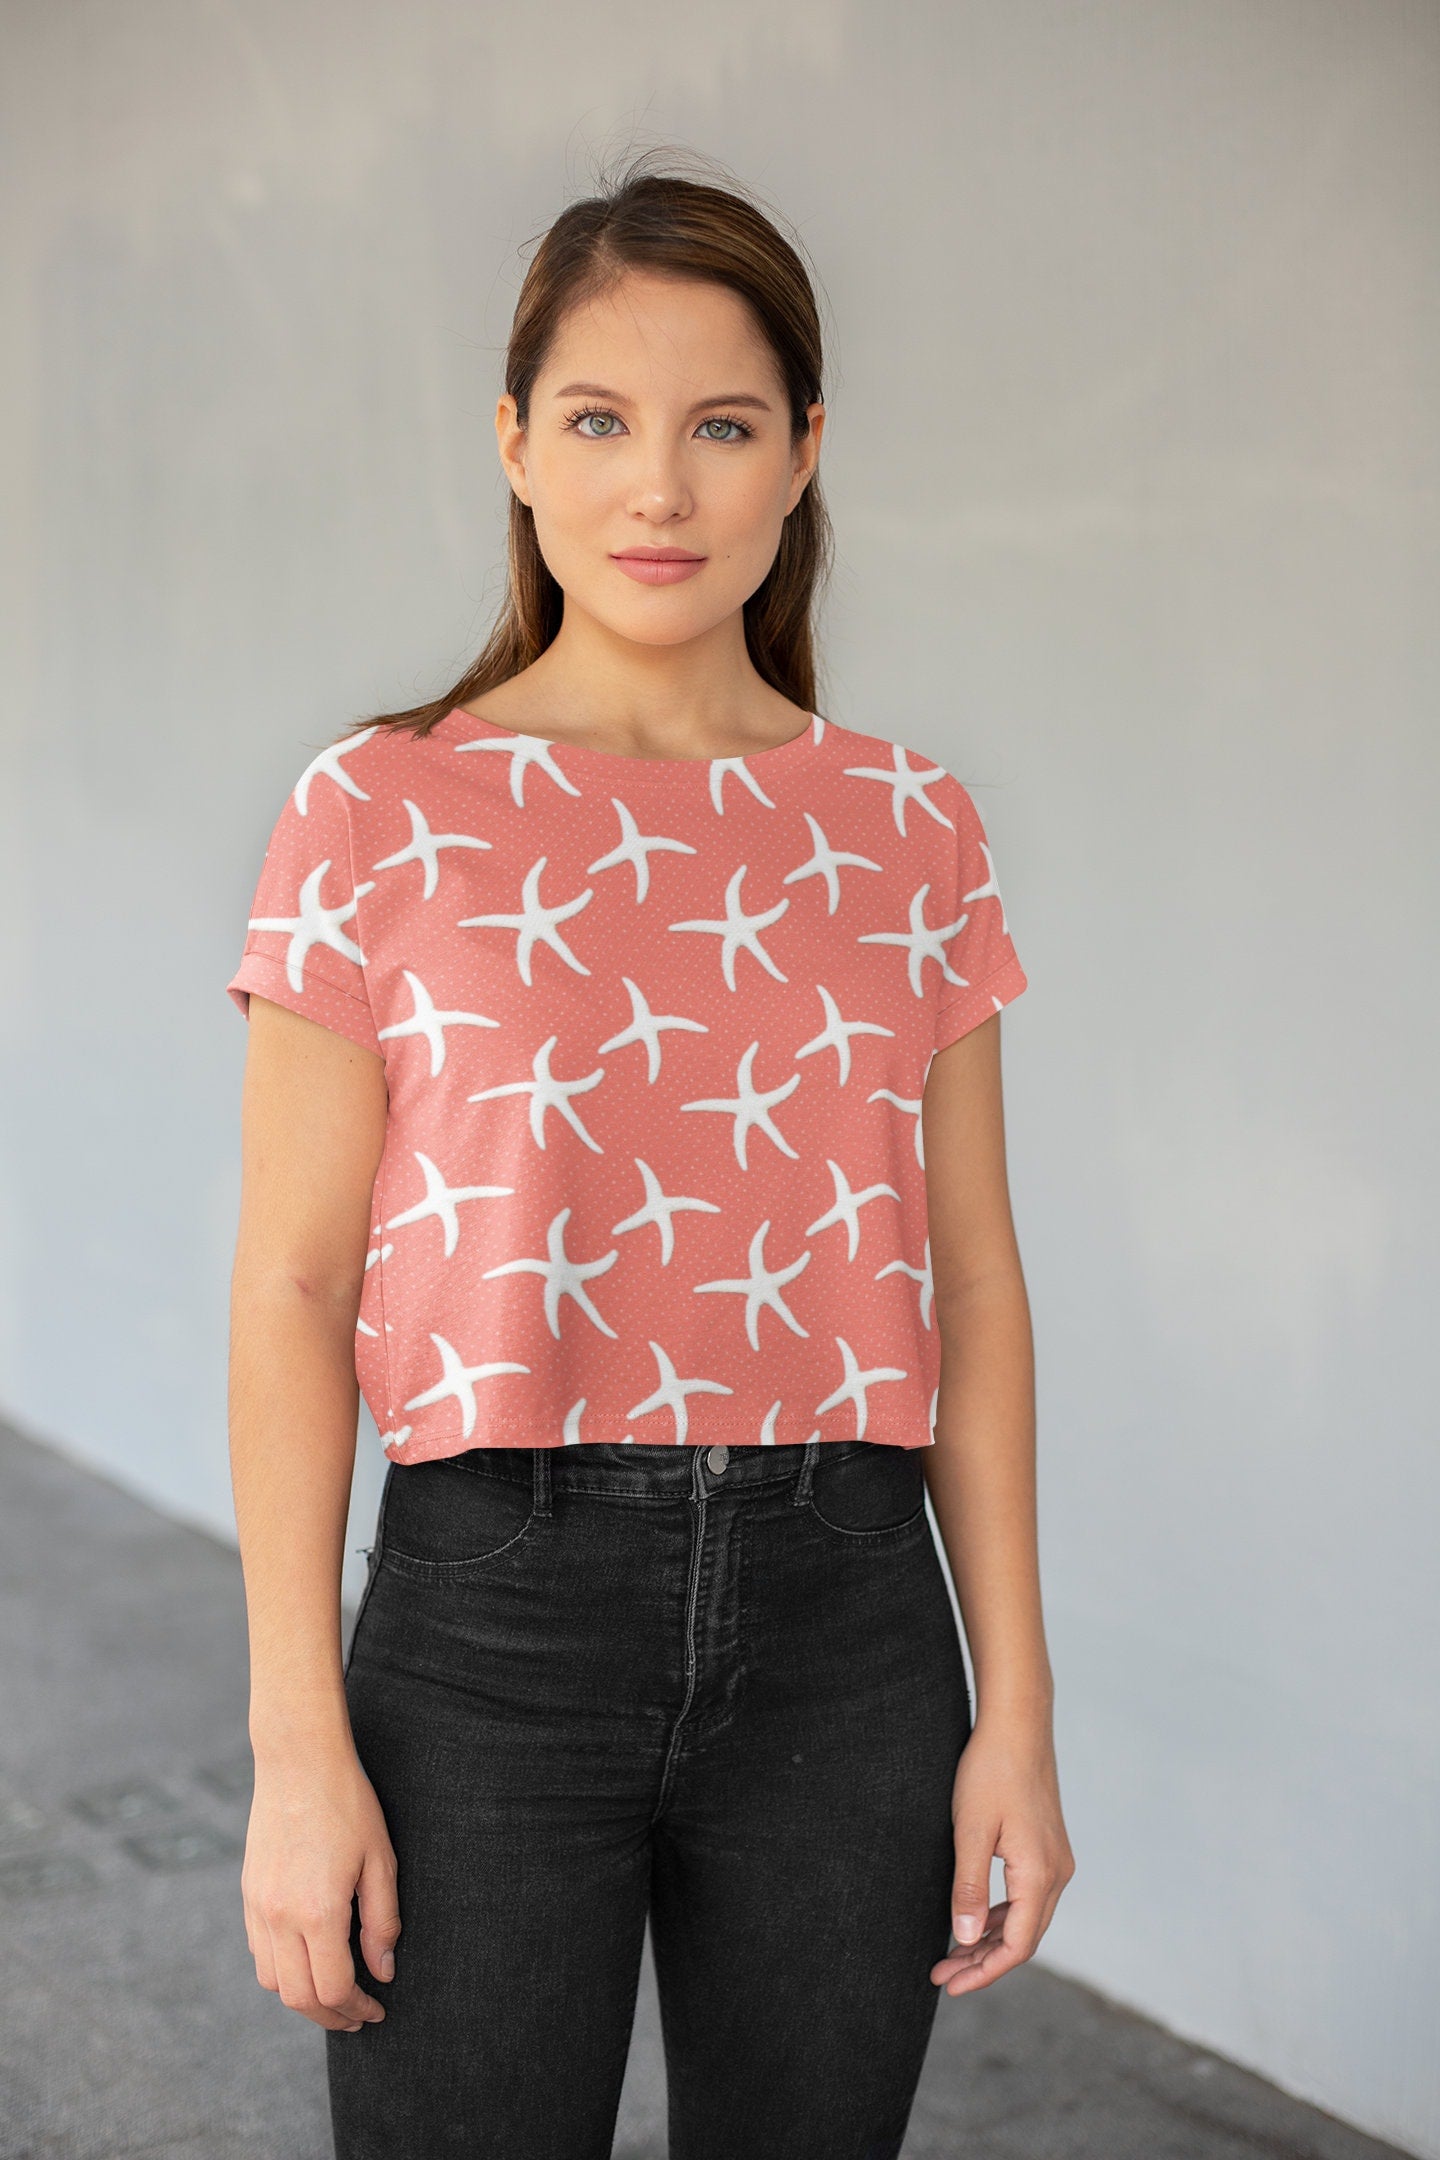 Stay Cool and Stylish: Summer Salmon Crop Tee - Trendy, Casual, and Comfortable! Crop tee with Coral designs, Fashionable and Fun Crop Tee